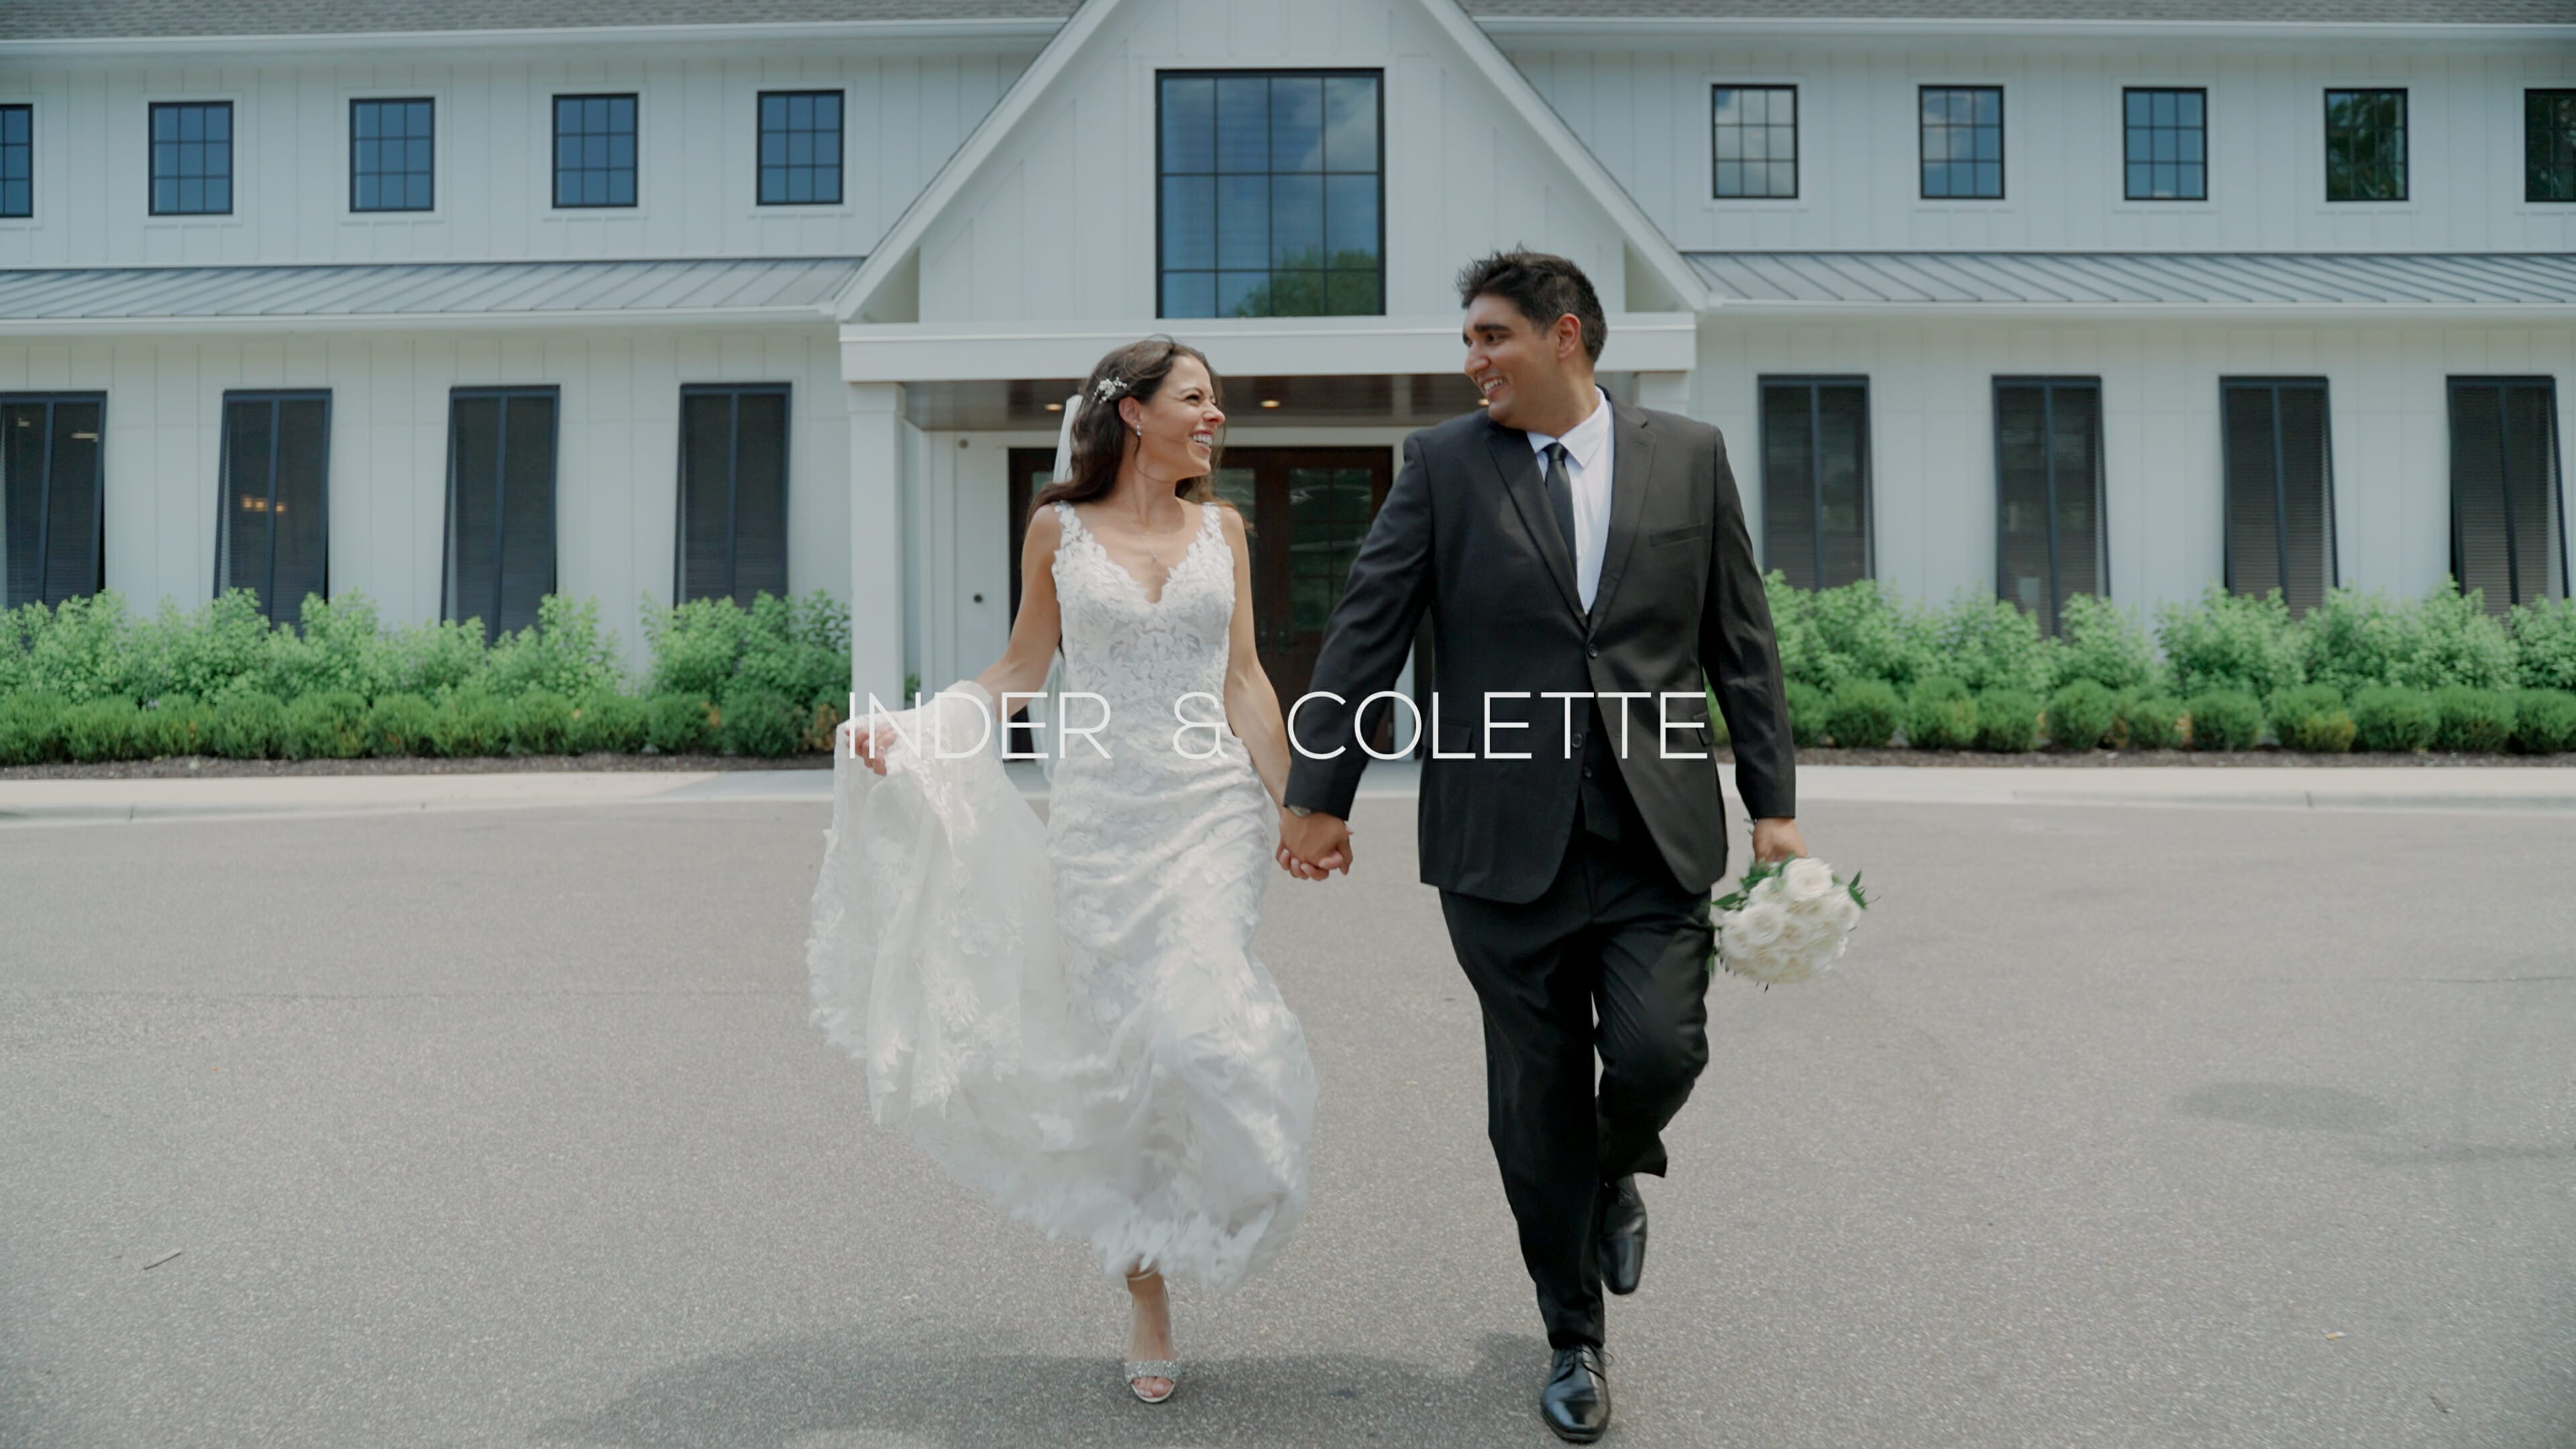 A groom and bride walking in front of The Hutton House on their wedding day.